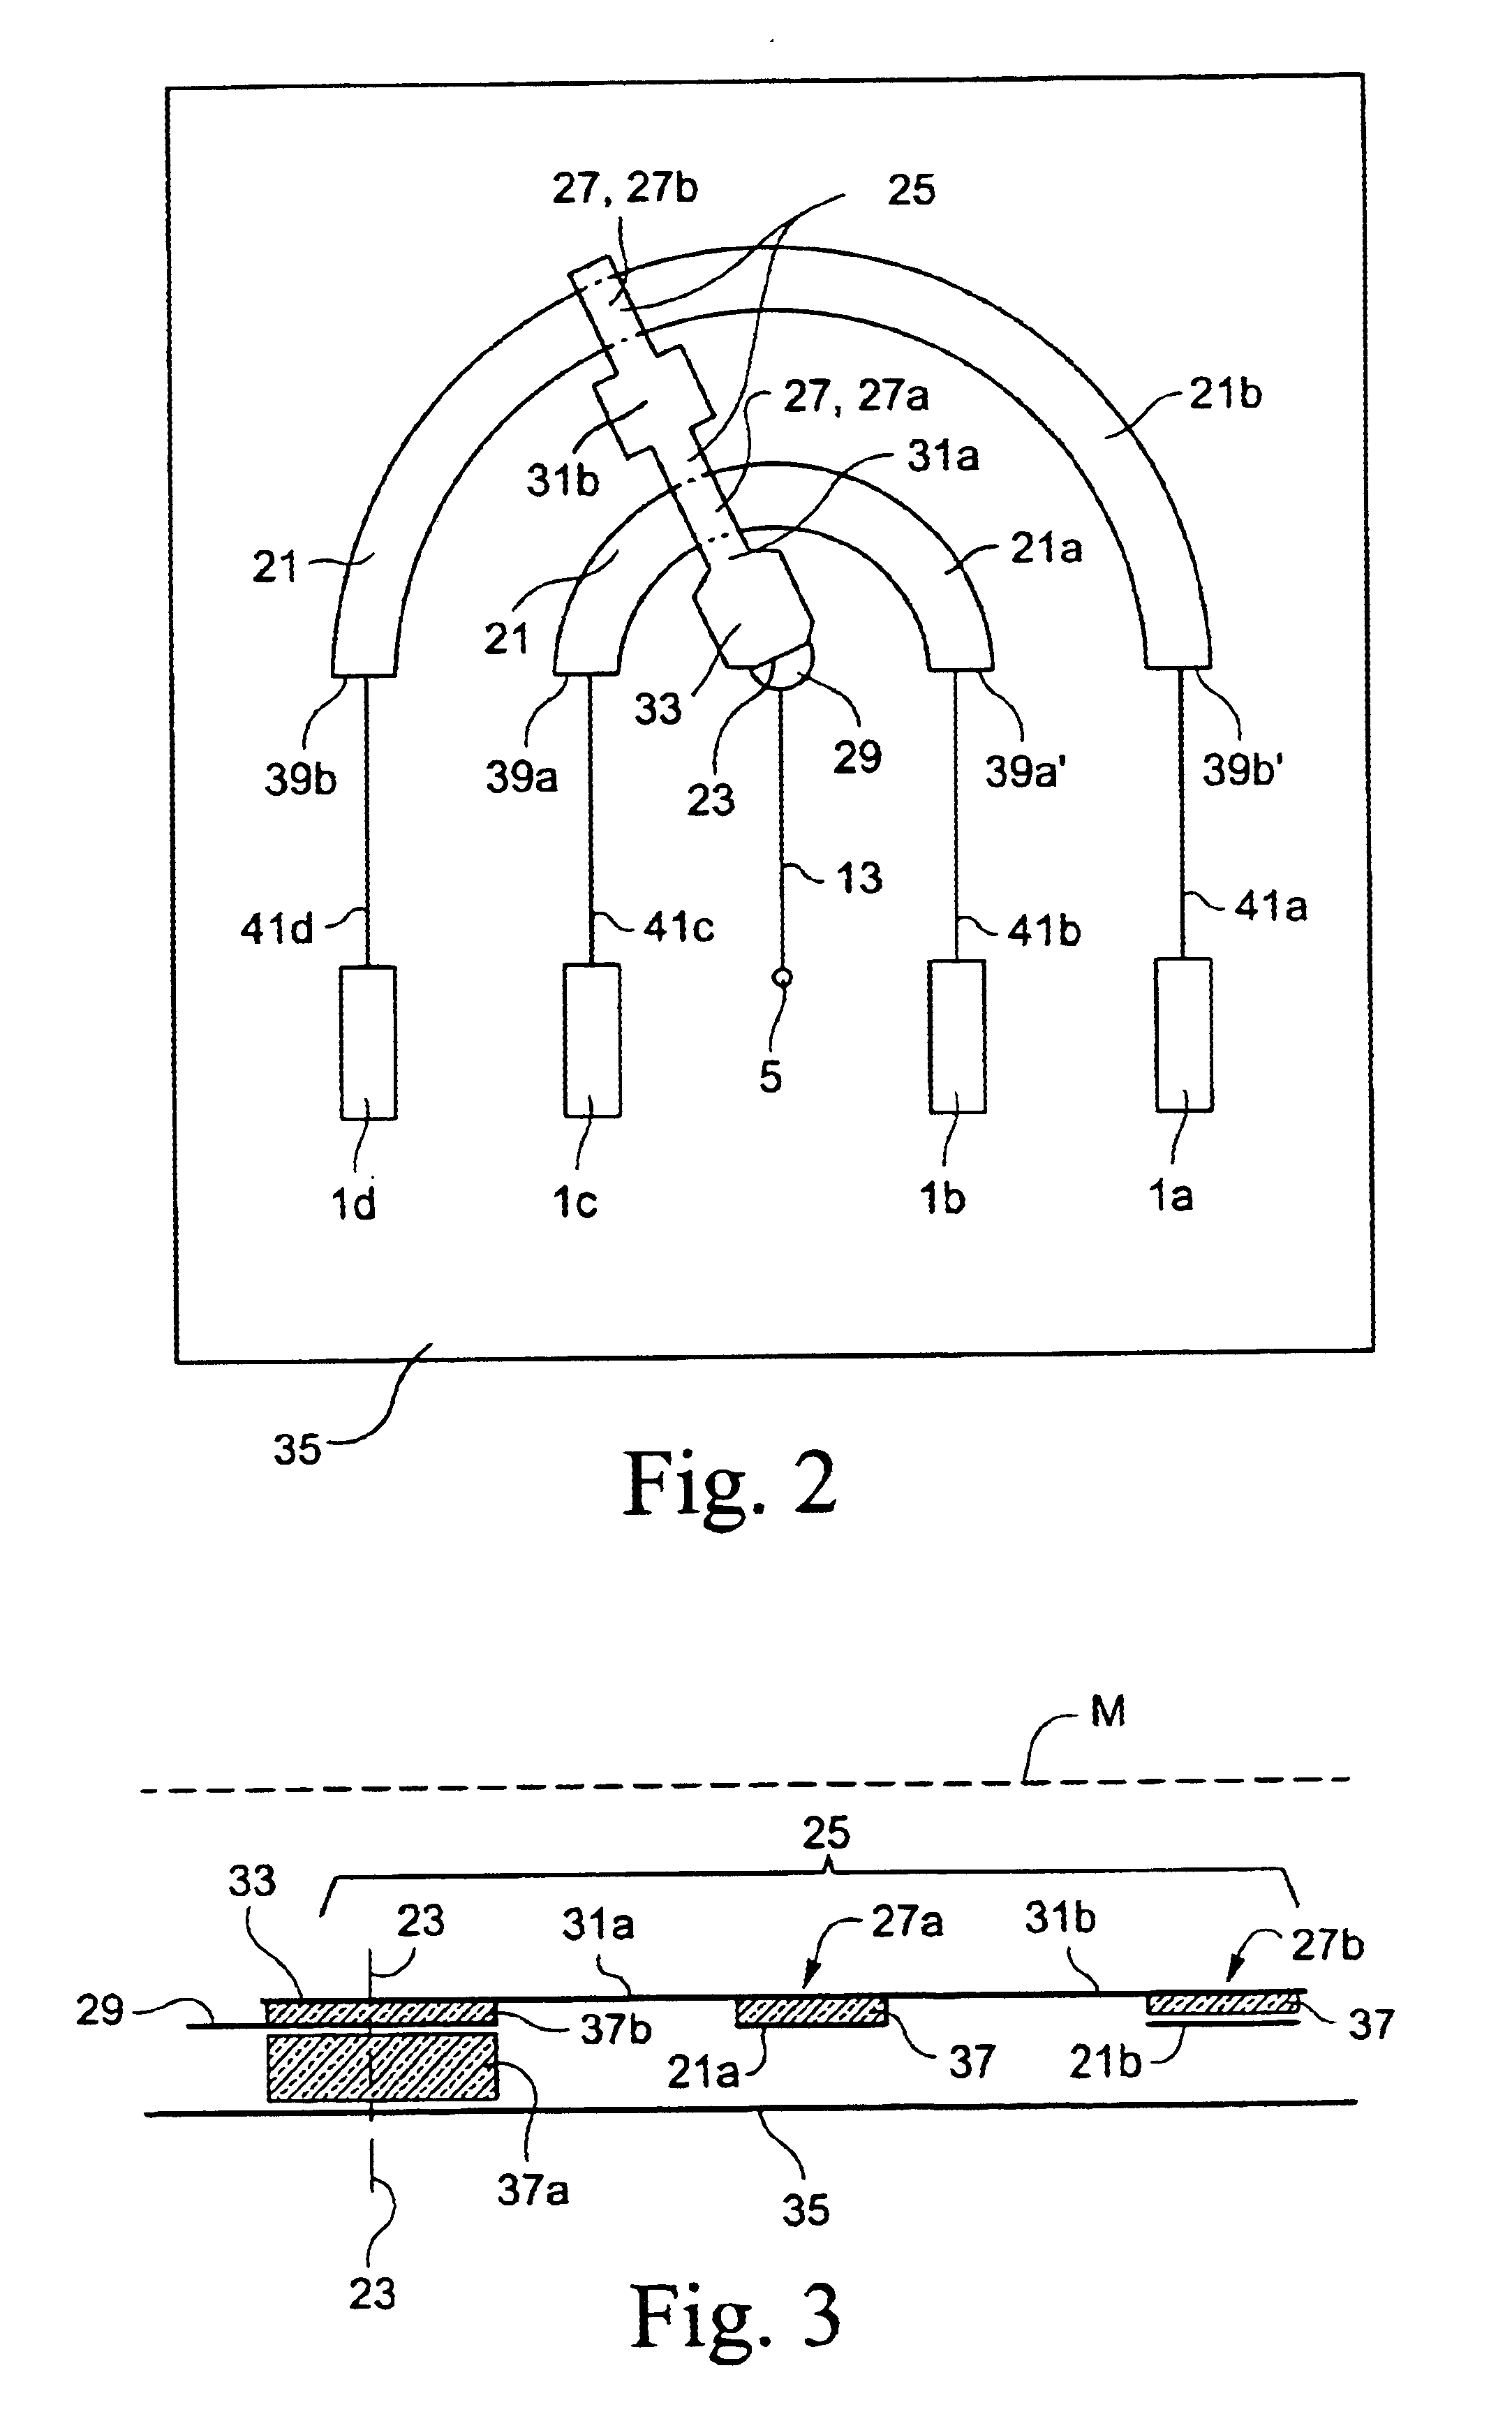 High-frequency phase shifter unit having pivotable tapping element